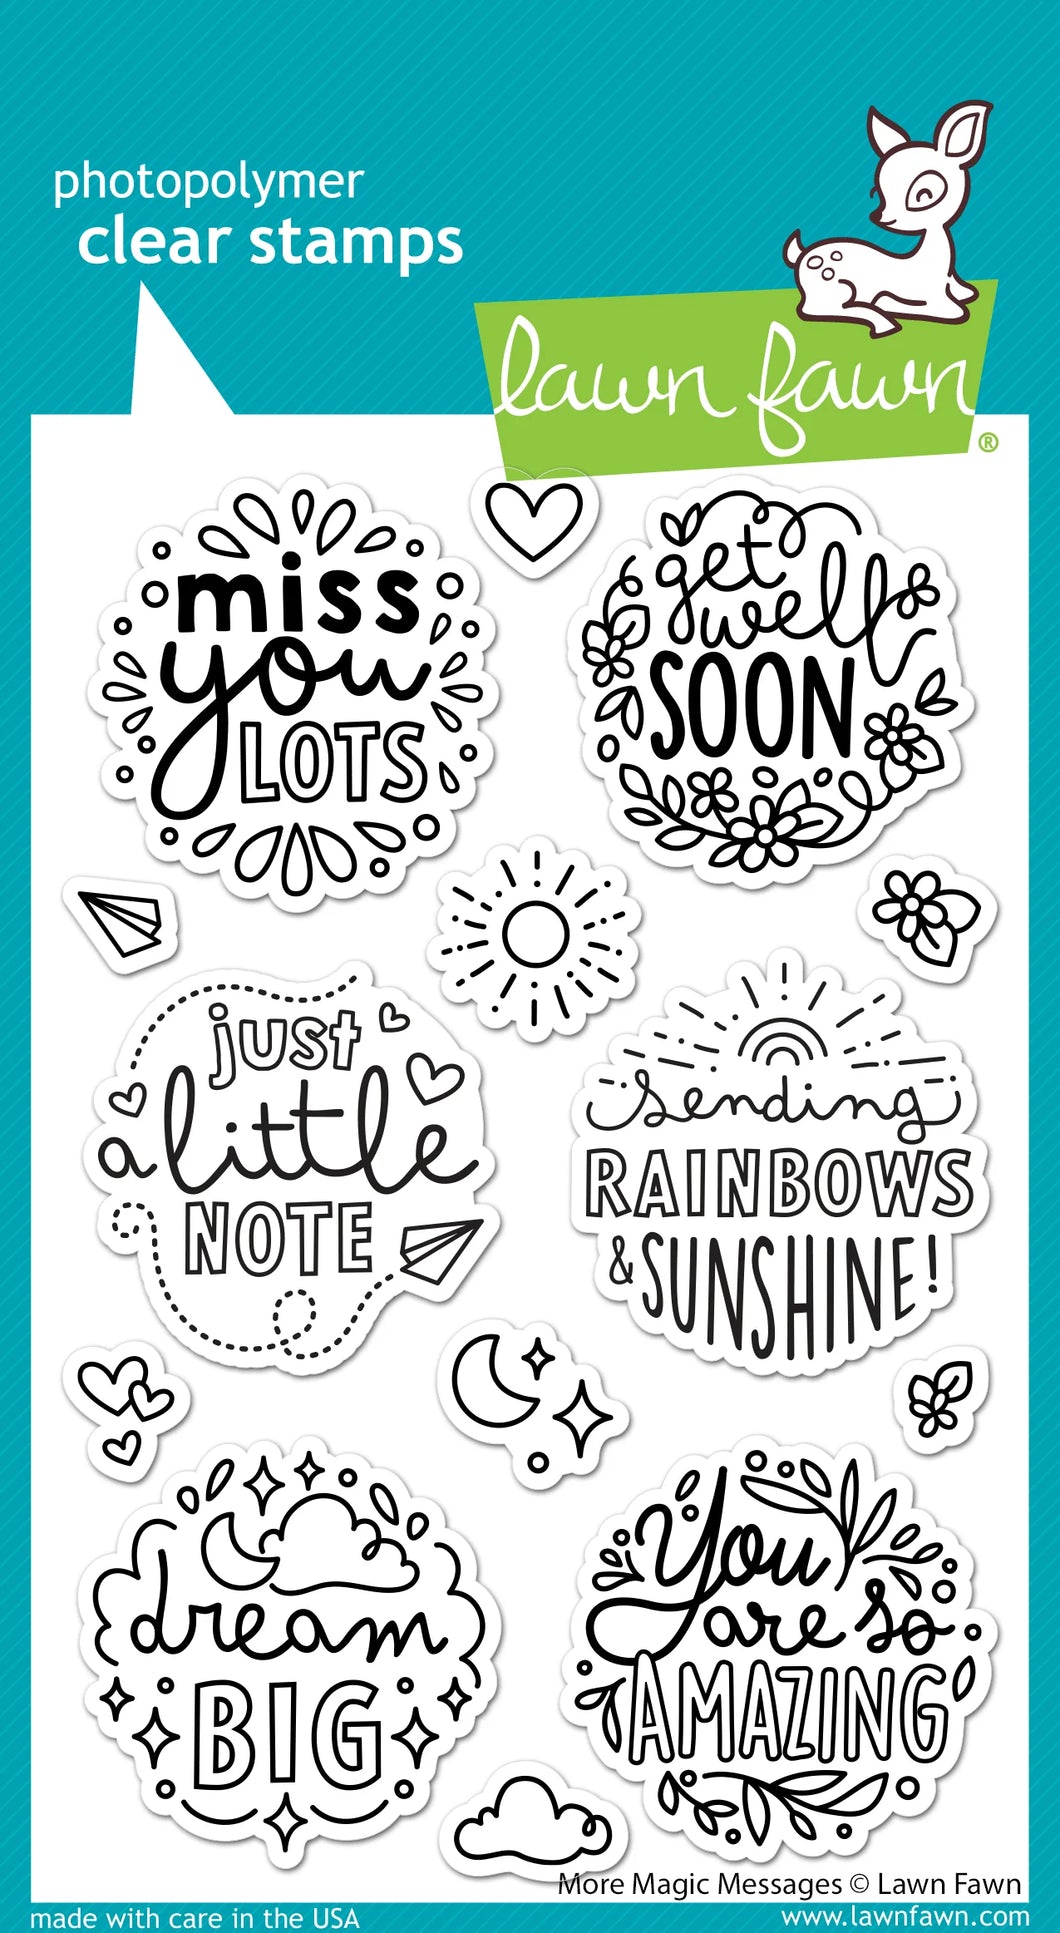 Lawn Fawn - more magic messages - clear stamp set